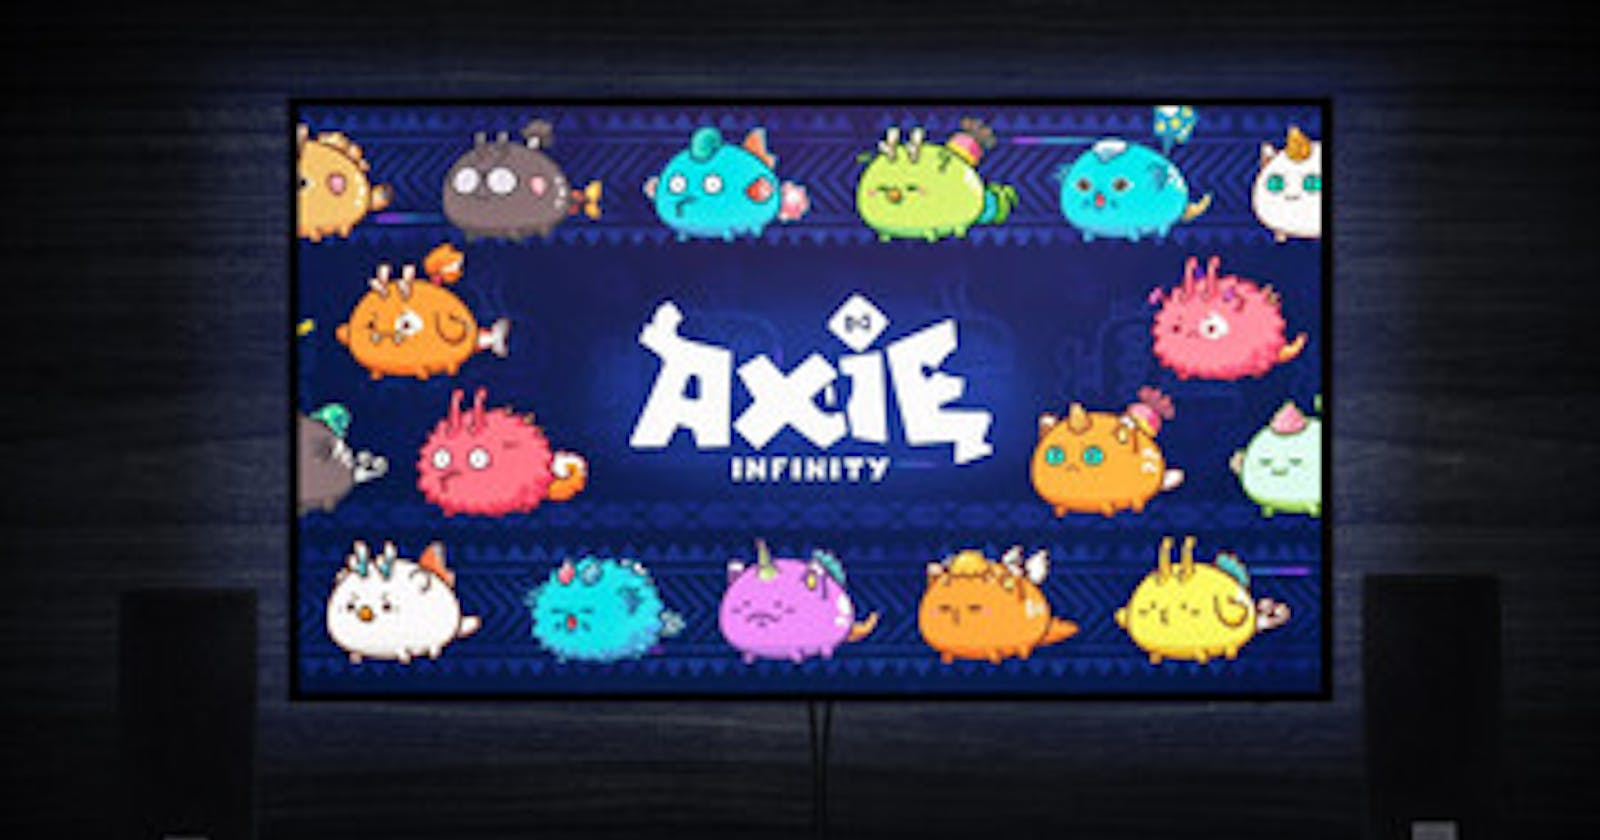 Why Should You Create A Blockchain Gaming Platform Similar To Axie Infinity?